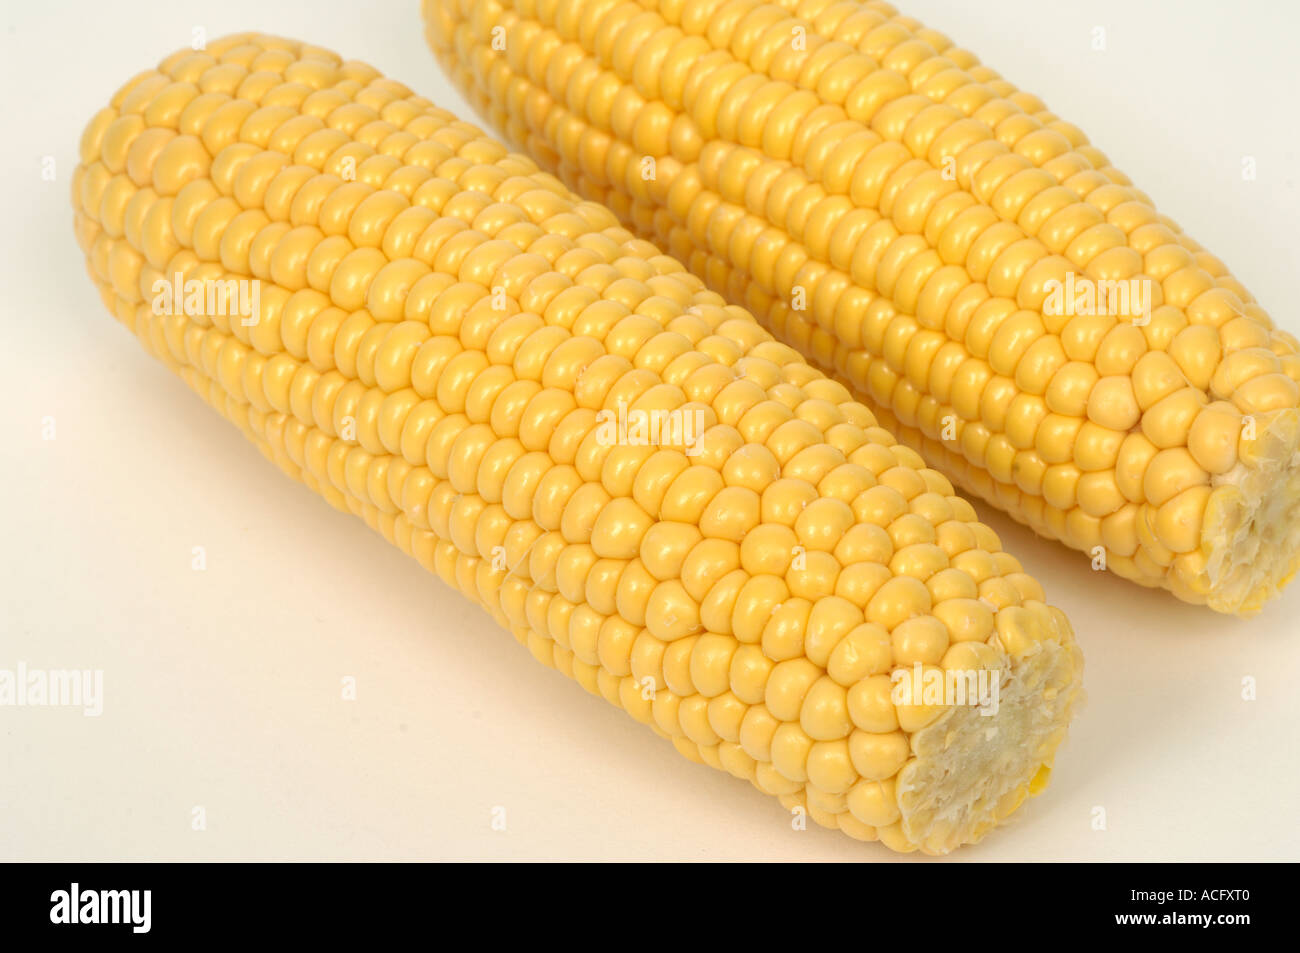 Vegetable produce typical supermarket bought cut trimmed sweetcorn cobs Stock Photo